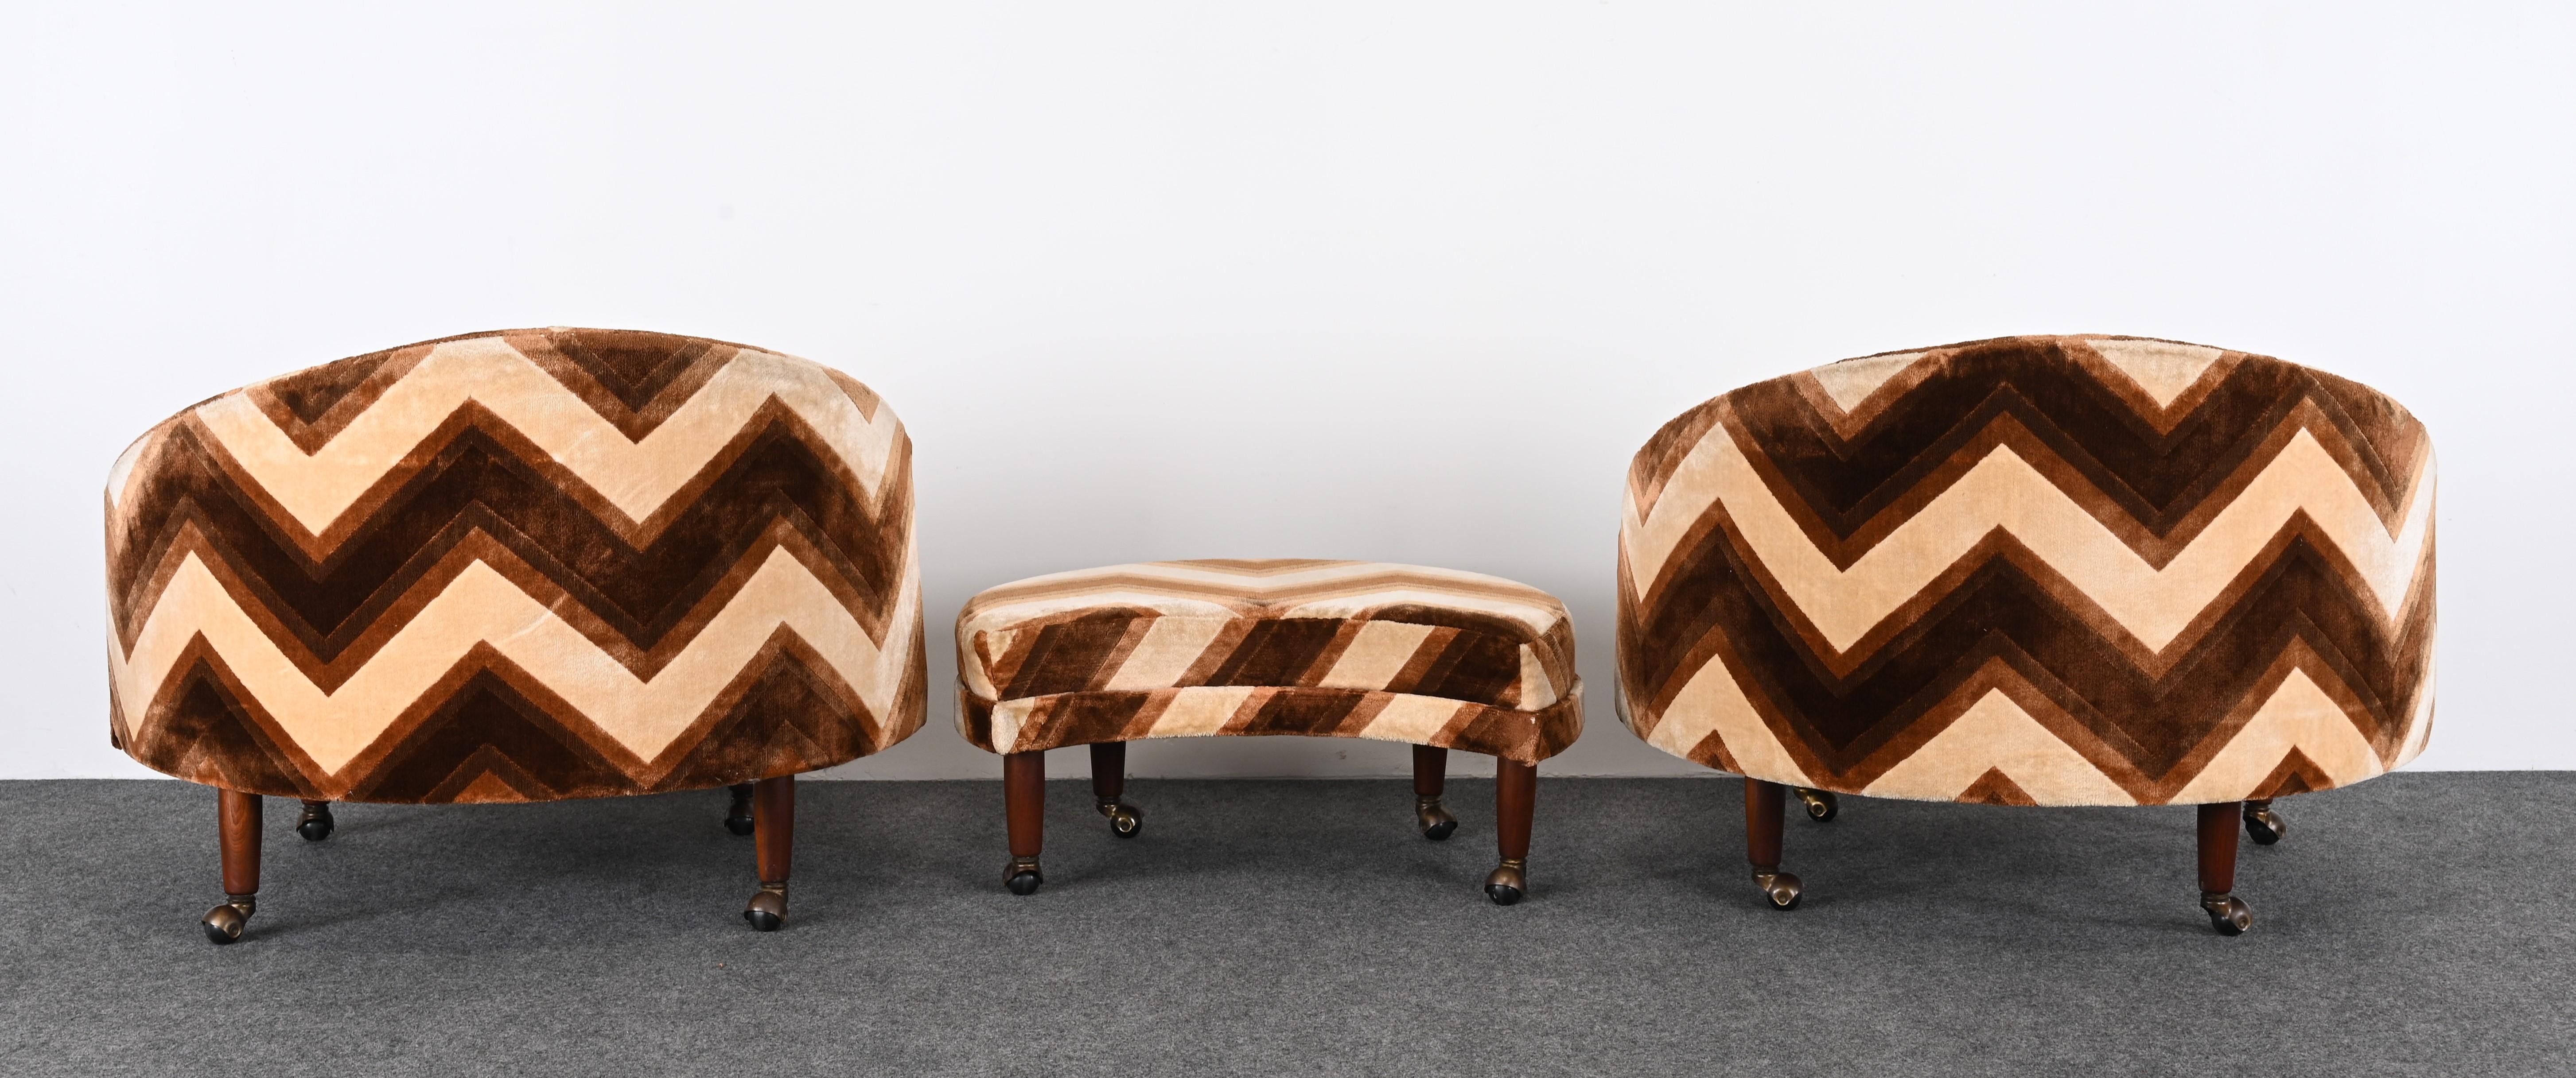 Pair of Adrian Pearsall Havana Lounge Chairs and Ottoman, 1965 For Sale 7